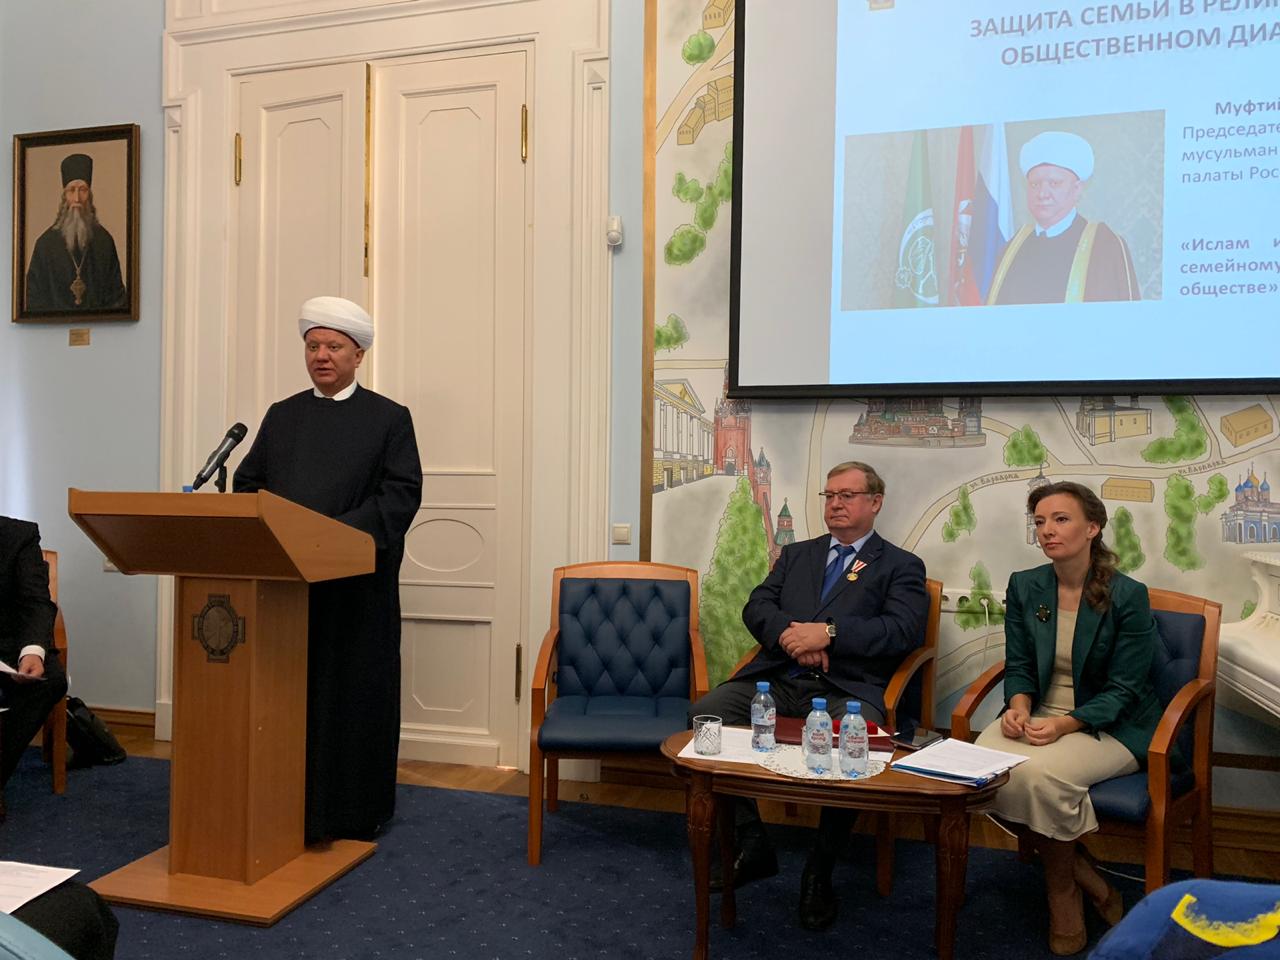 MUFTI ALBIR-KHAZRAT KRGANOV SPEAKS AT INTERFAITH CONFERENCE DEVOTED TO THE PROTECTION OF FAMILY VALUES